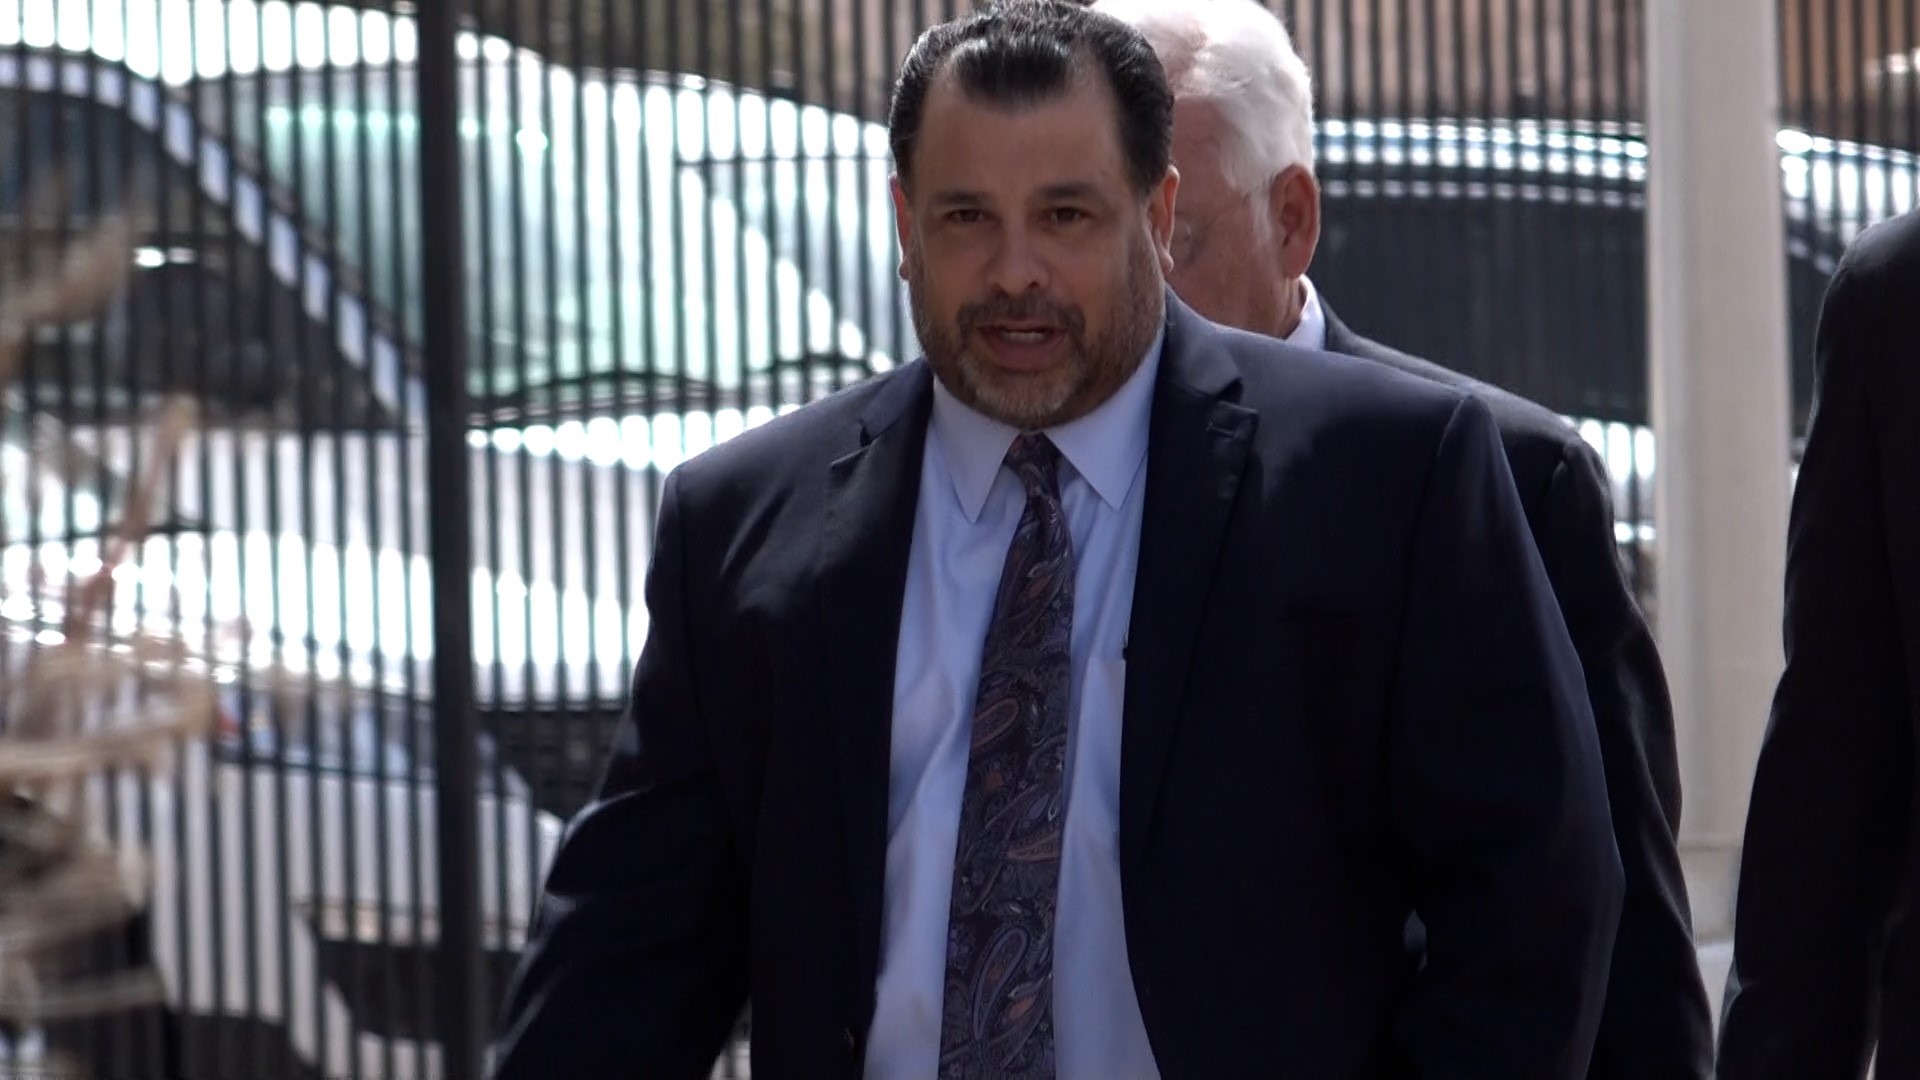 Tim Vasquez was found guilty in March 2022 on one charge of bribery and three counts of honest services mail fraud.